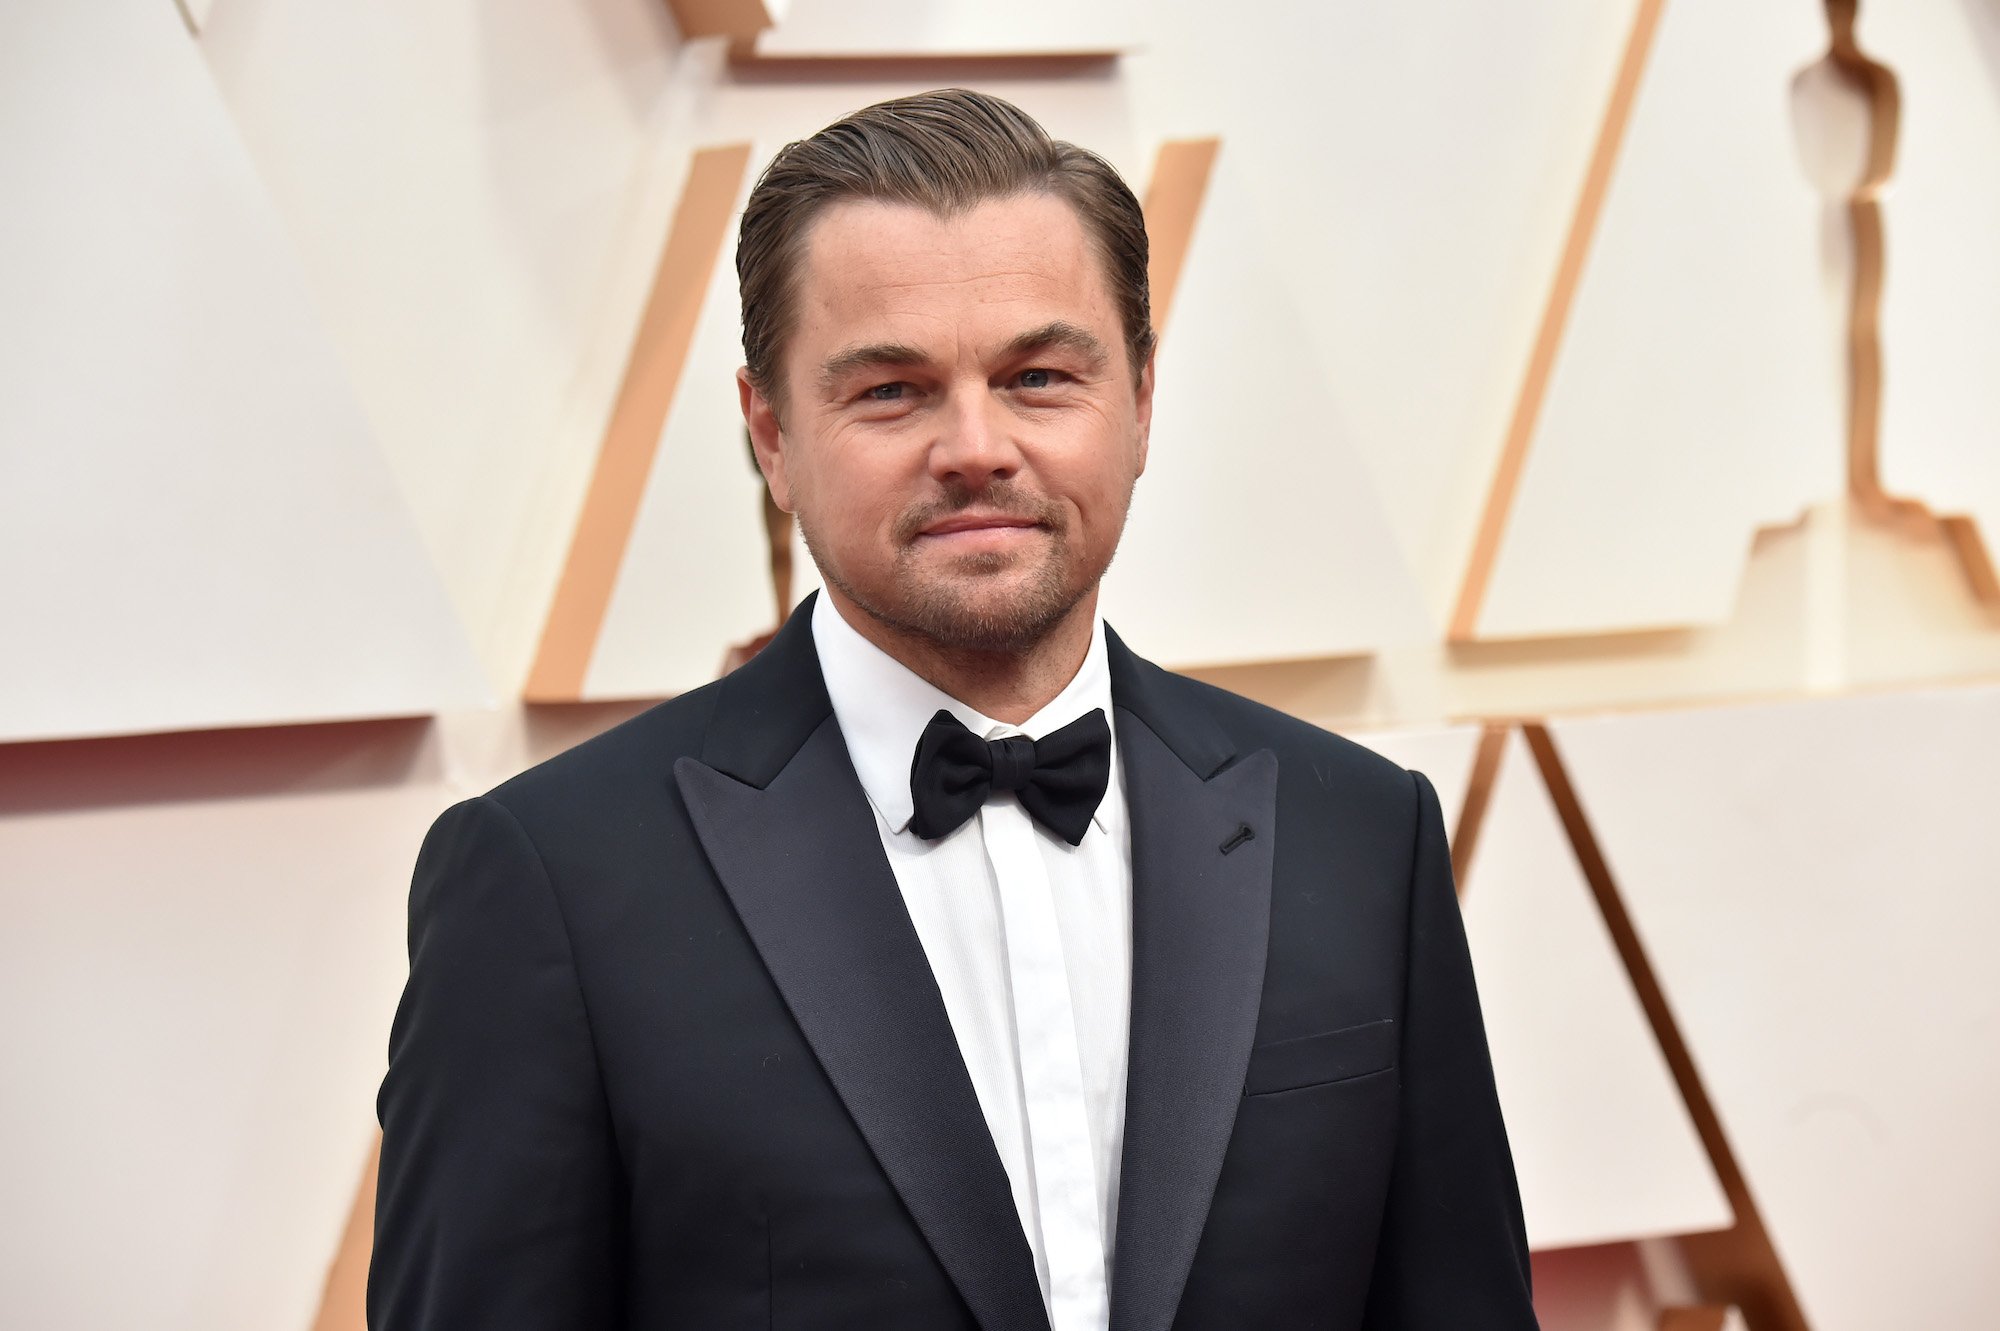 Leonardo DiCaprio Dropped Out of High School Just Before His Senior Year